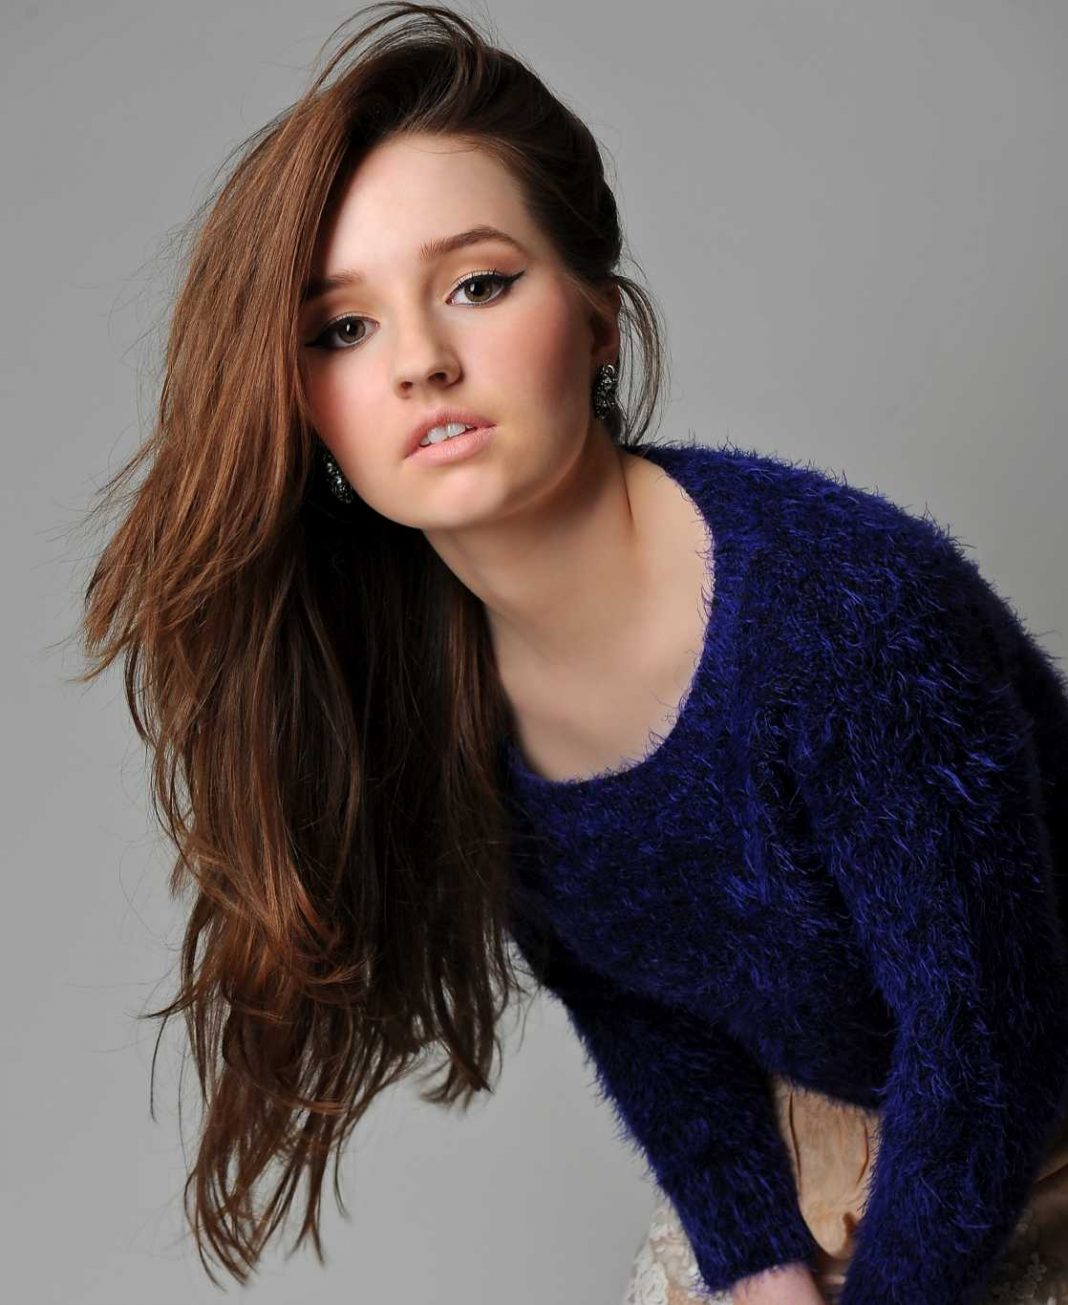 41 kaitlyn dever Nude Pictures Which Will Make You Give Up To Her Inexplicable Beauty 64